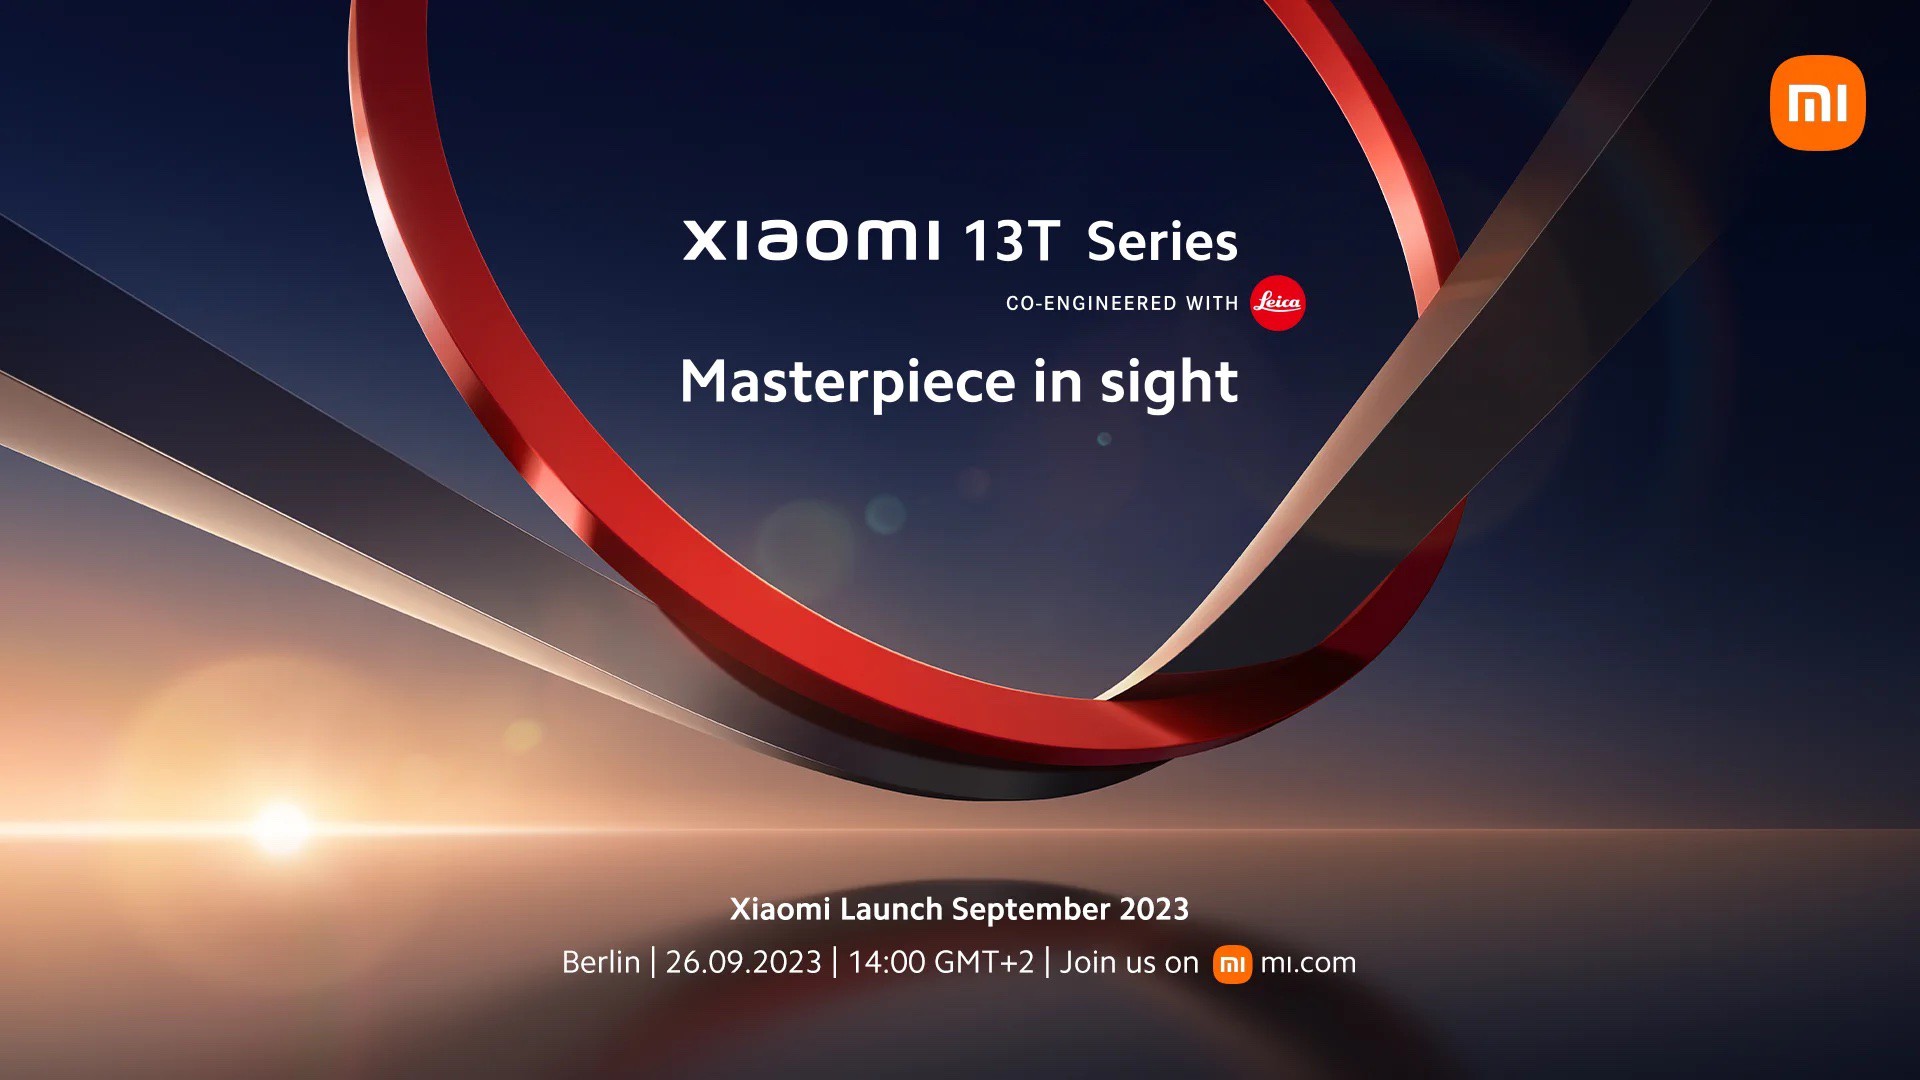 Xiaomi 13T and 13T Pro to Launch on September 26 in Berlin; MediaTek Dimensity SoC Expected | DroidAfrica